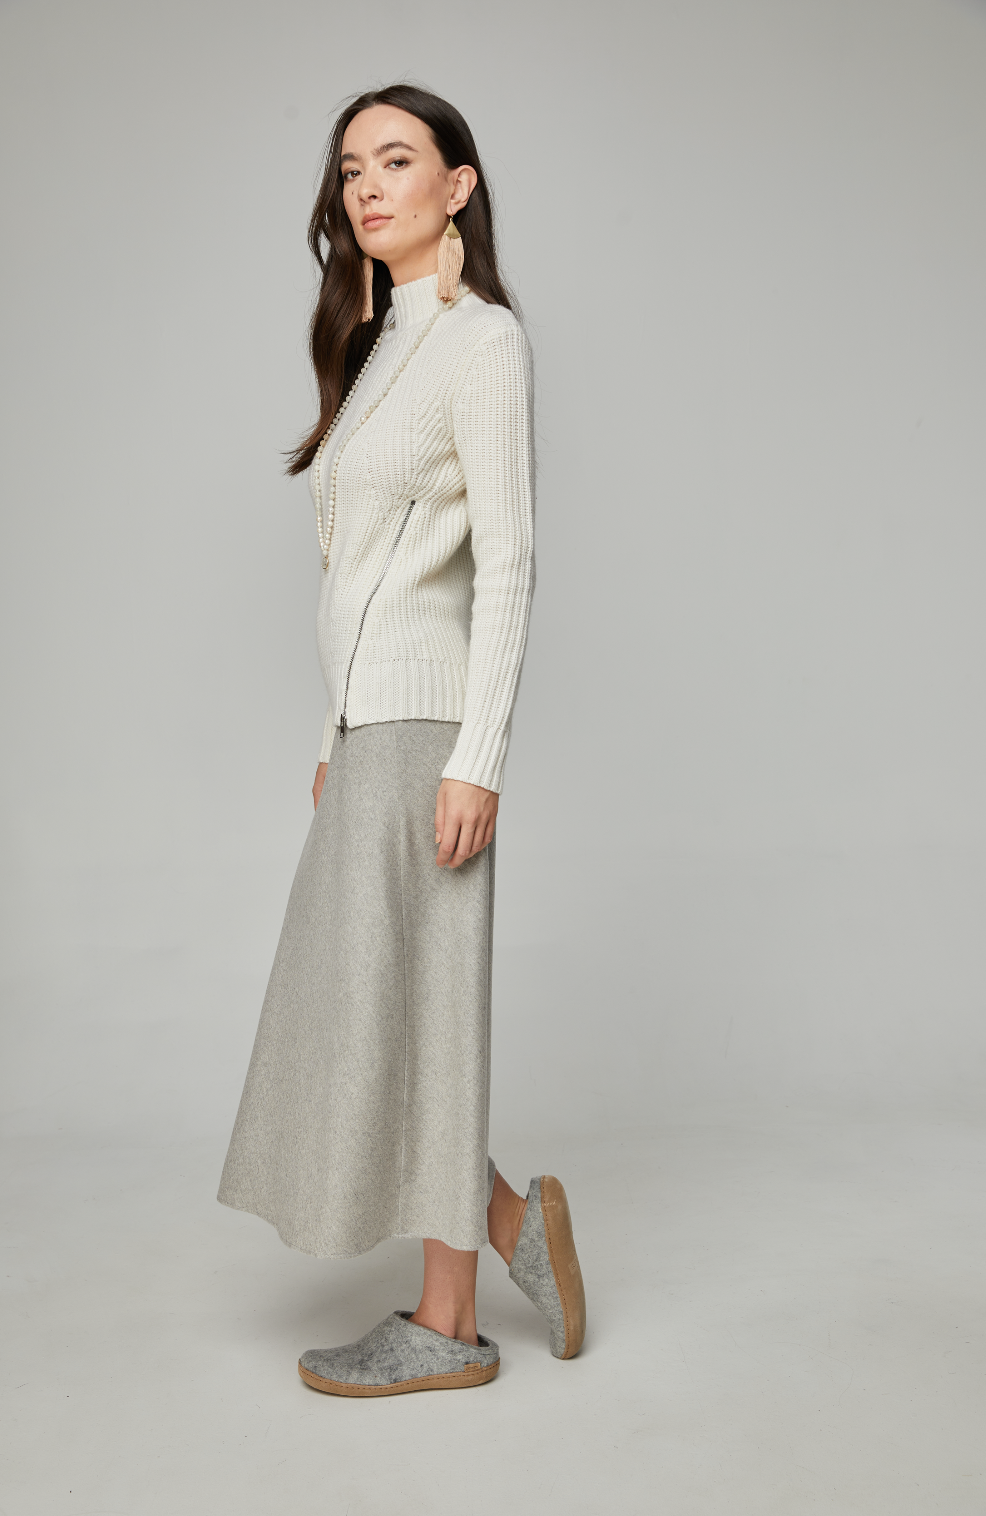 The Coquitlam Cashmere Skirt